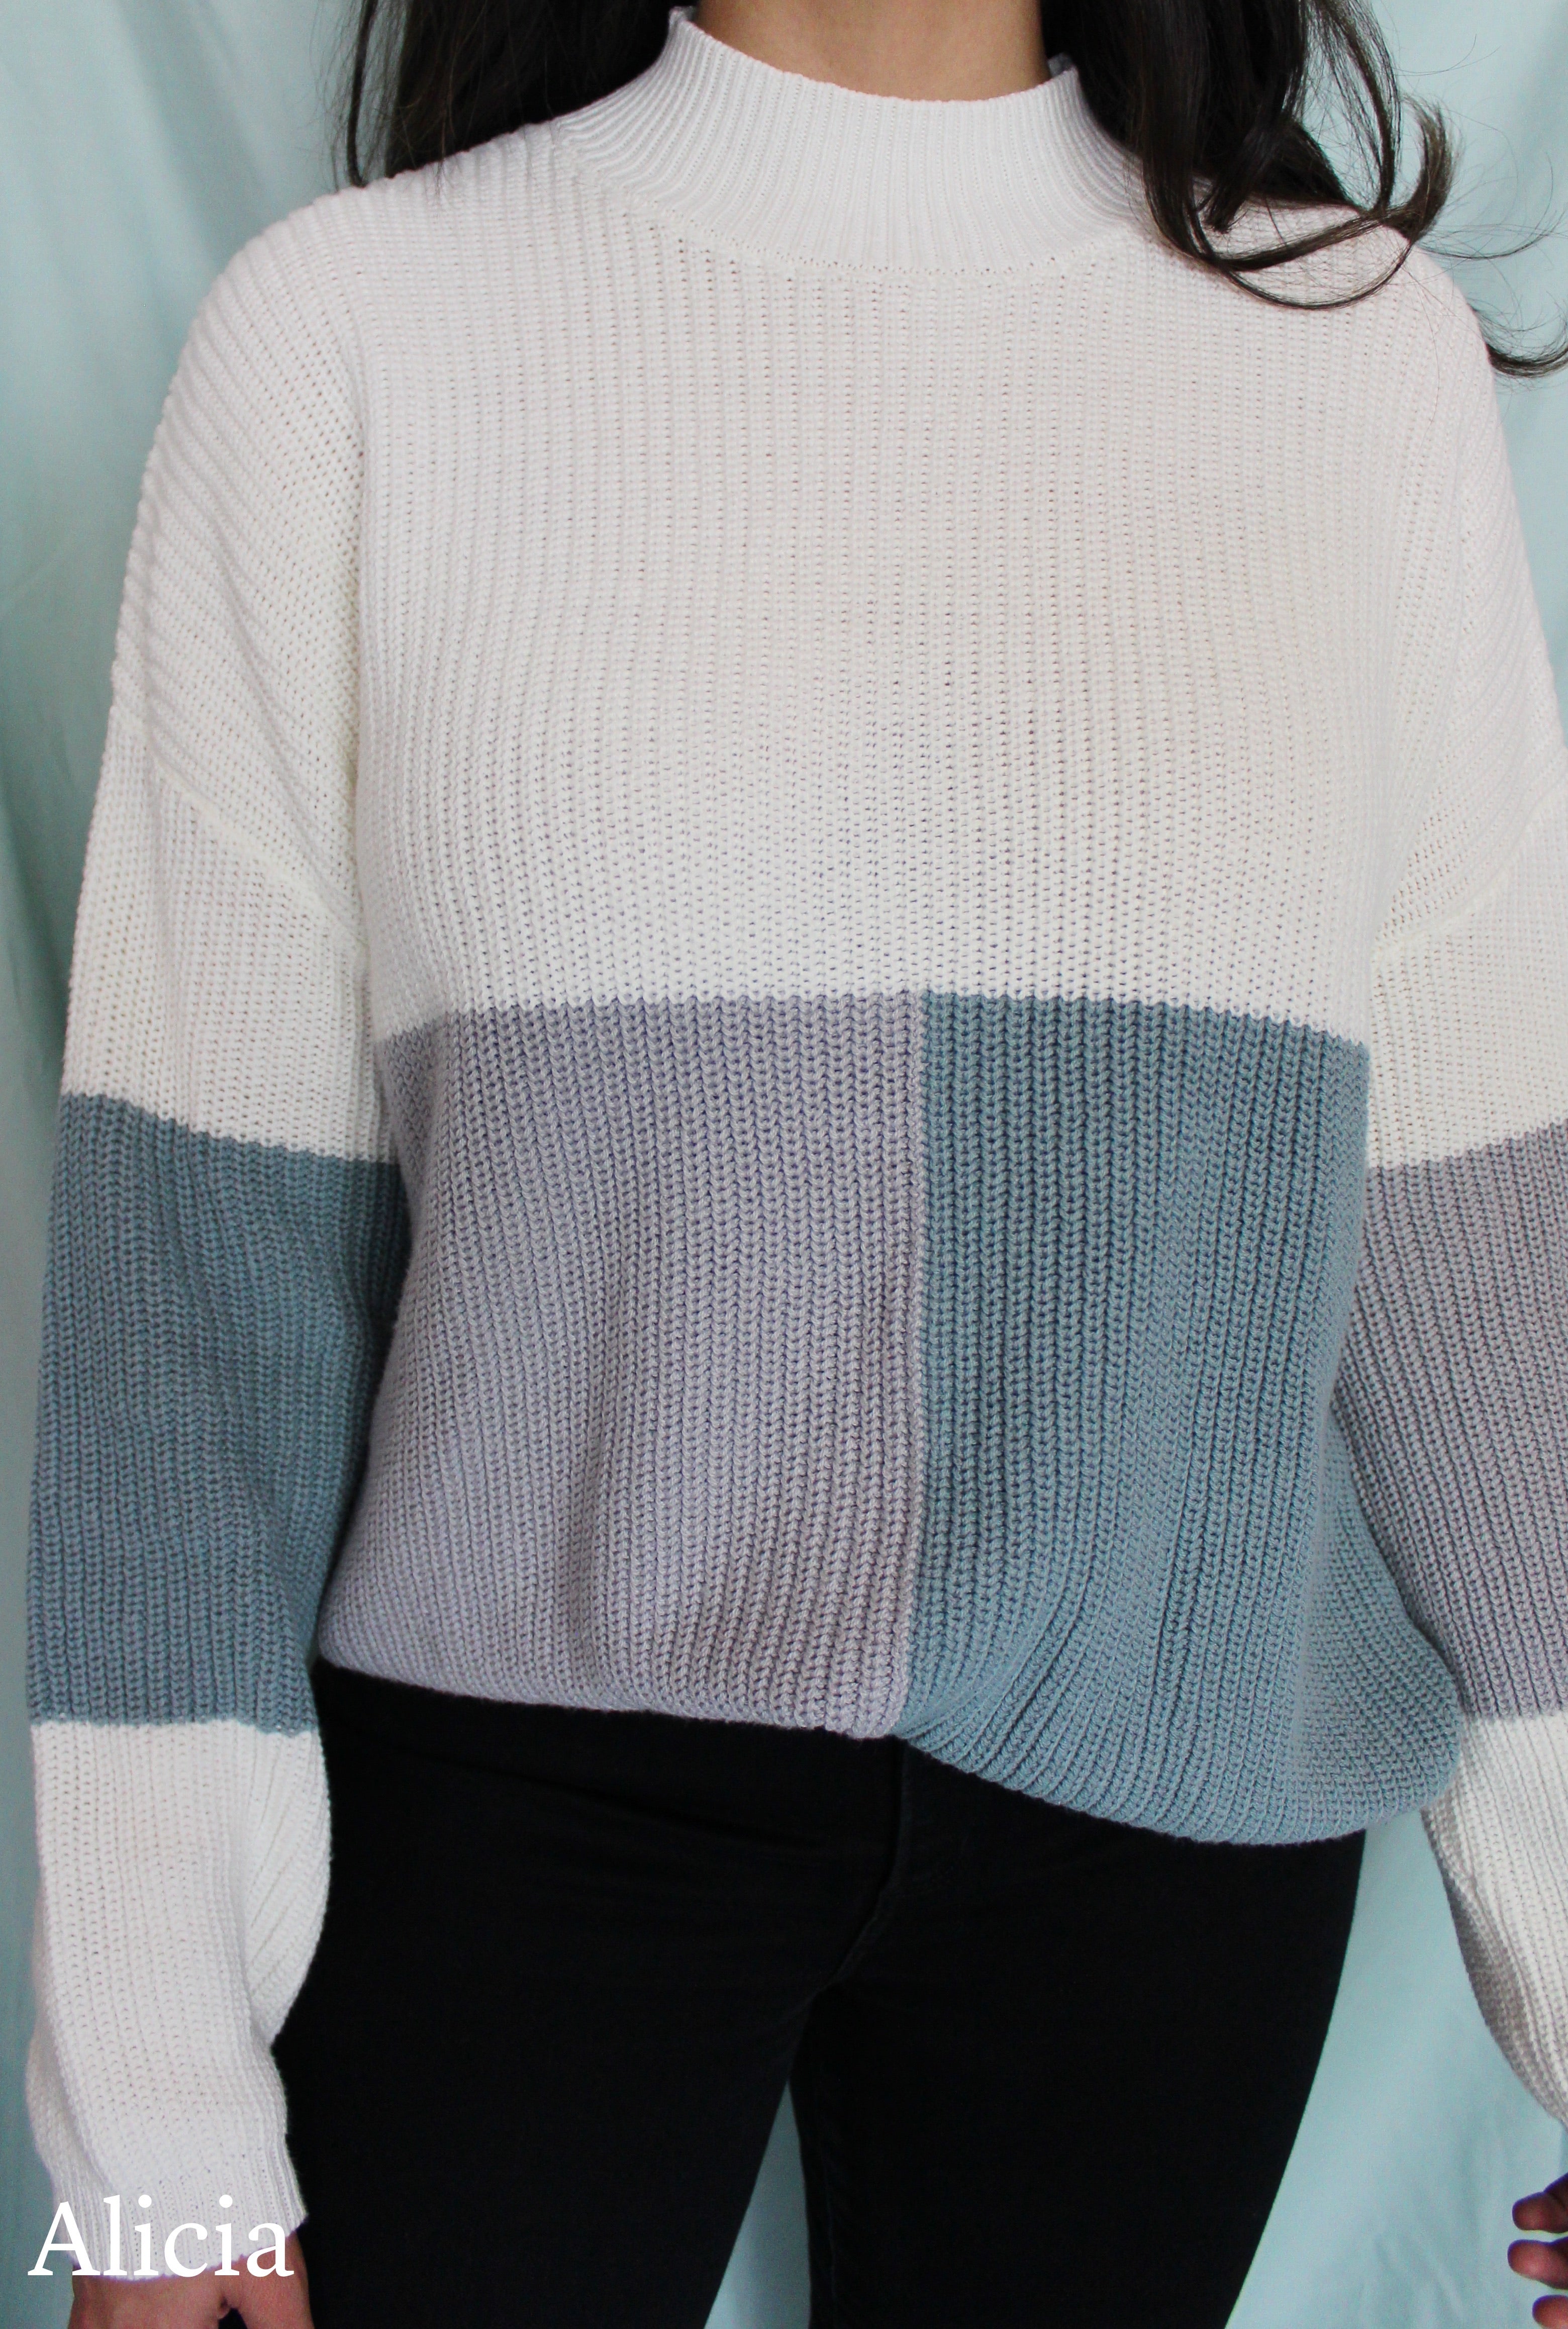 The Baby It's Cold Outside Color Block Sweater